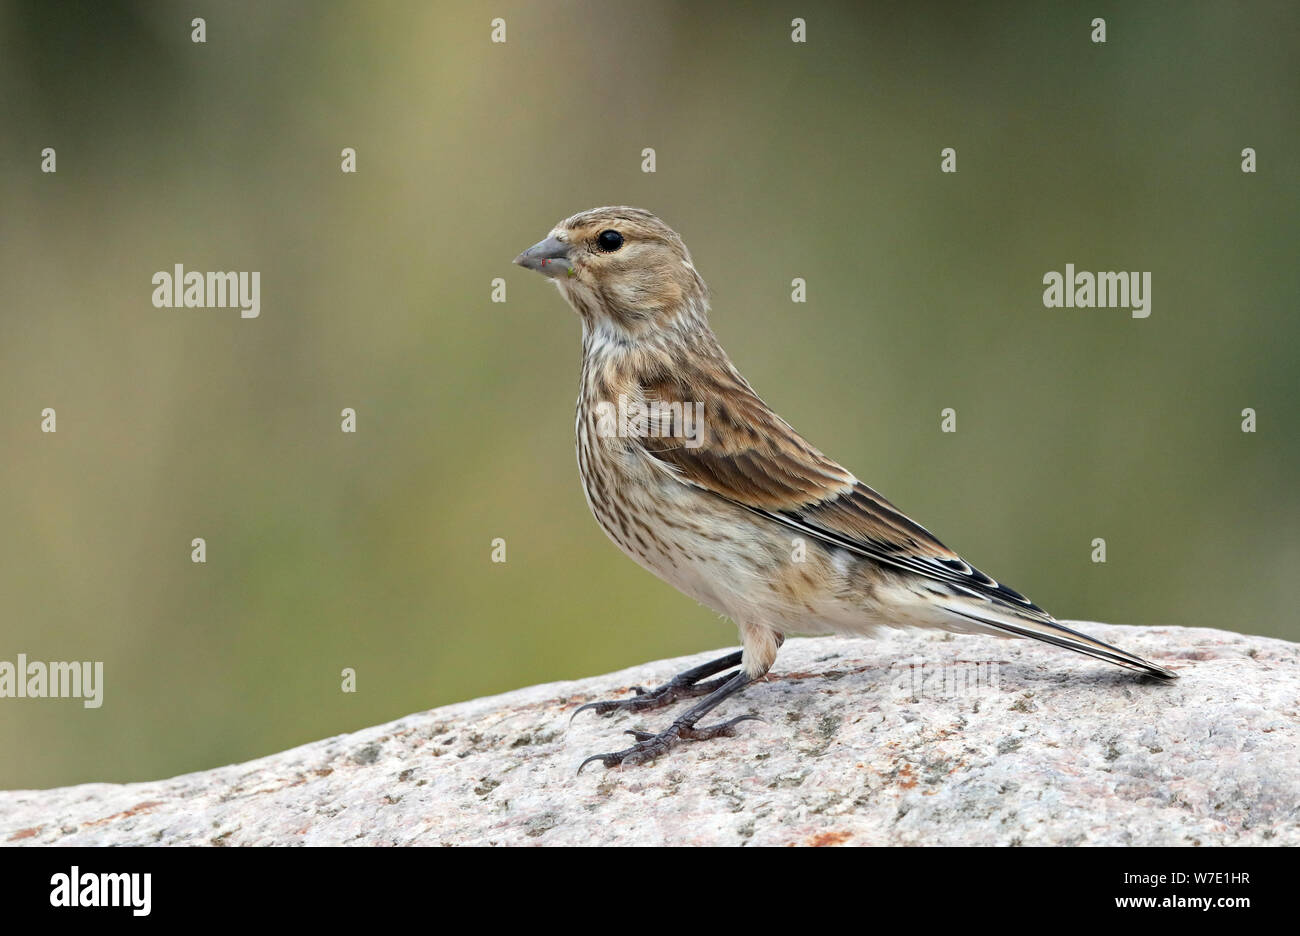 Young Common linnet, Linaria cannabina, standing on rock Stock Photo